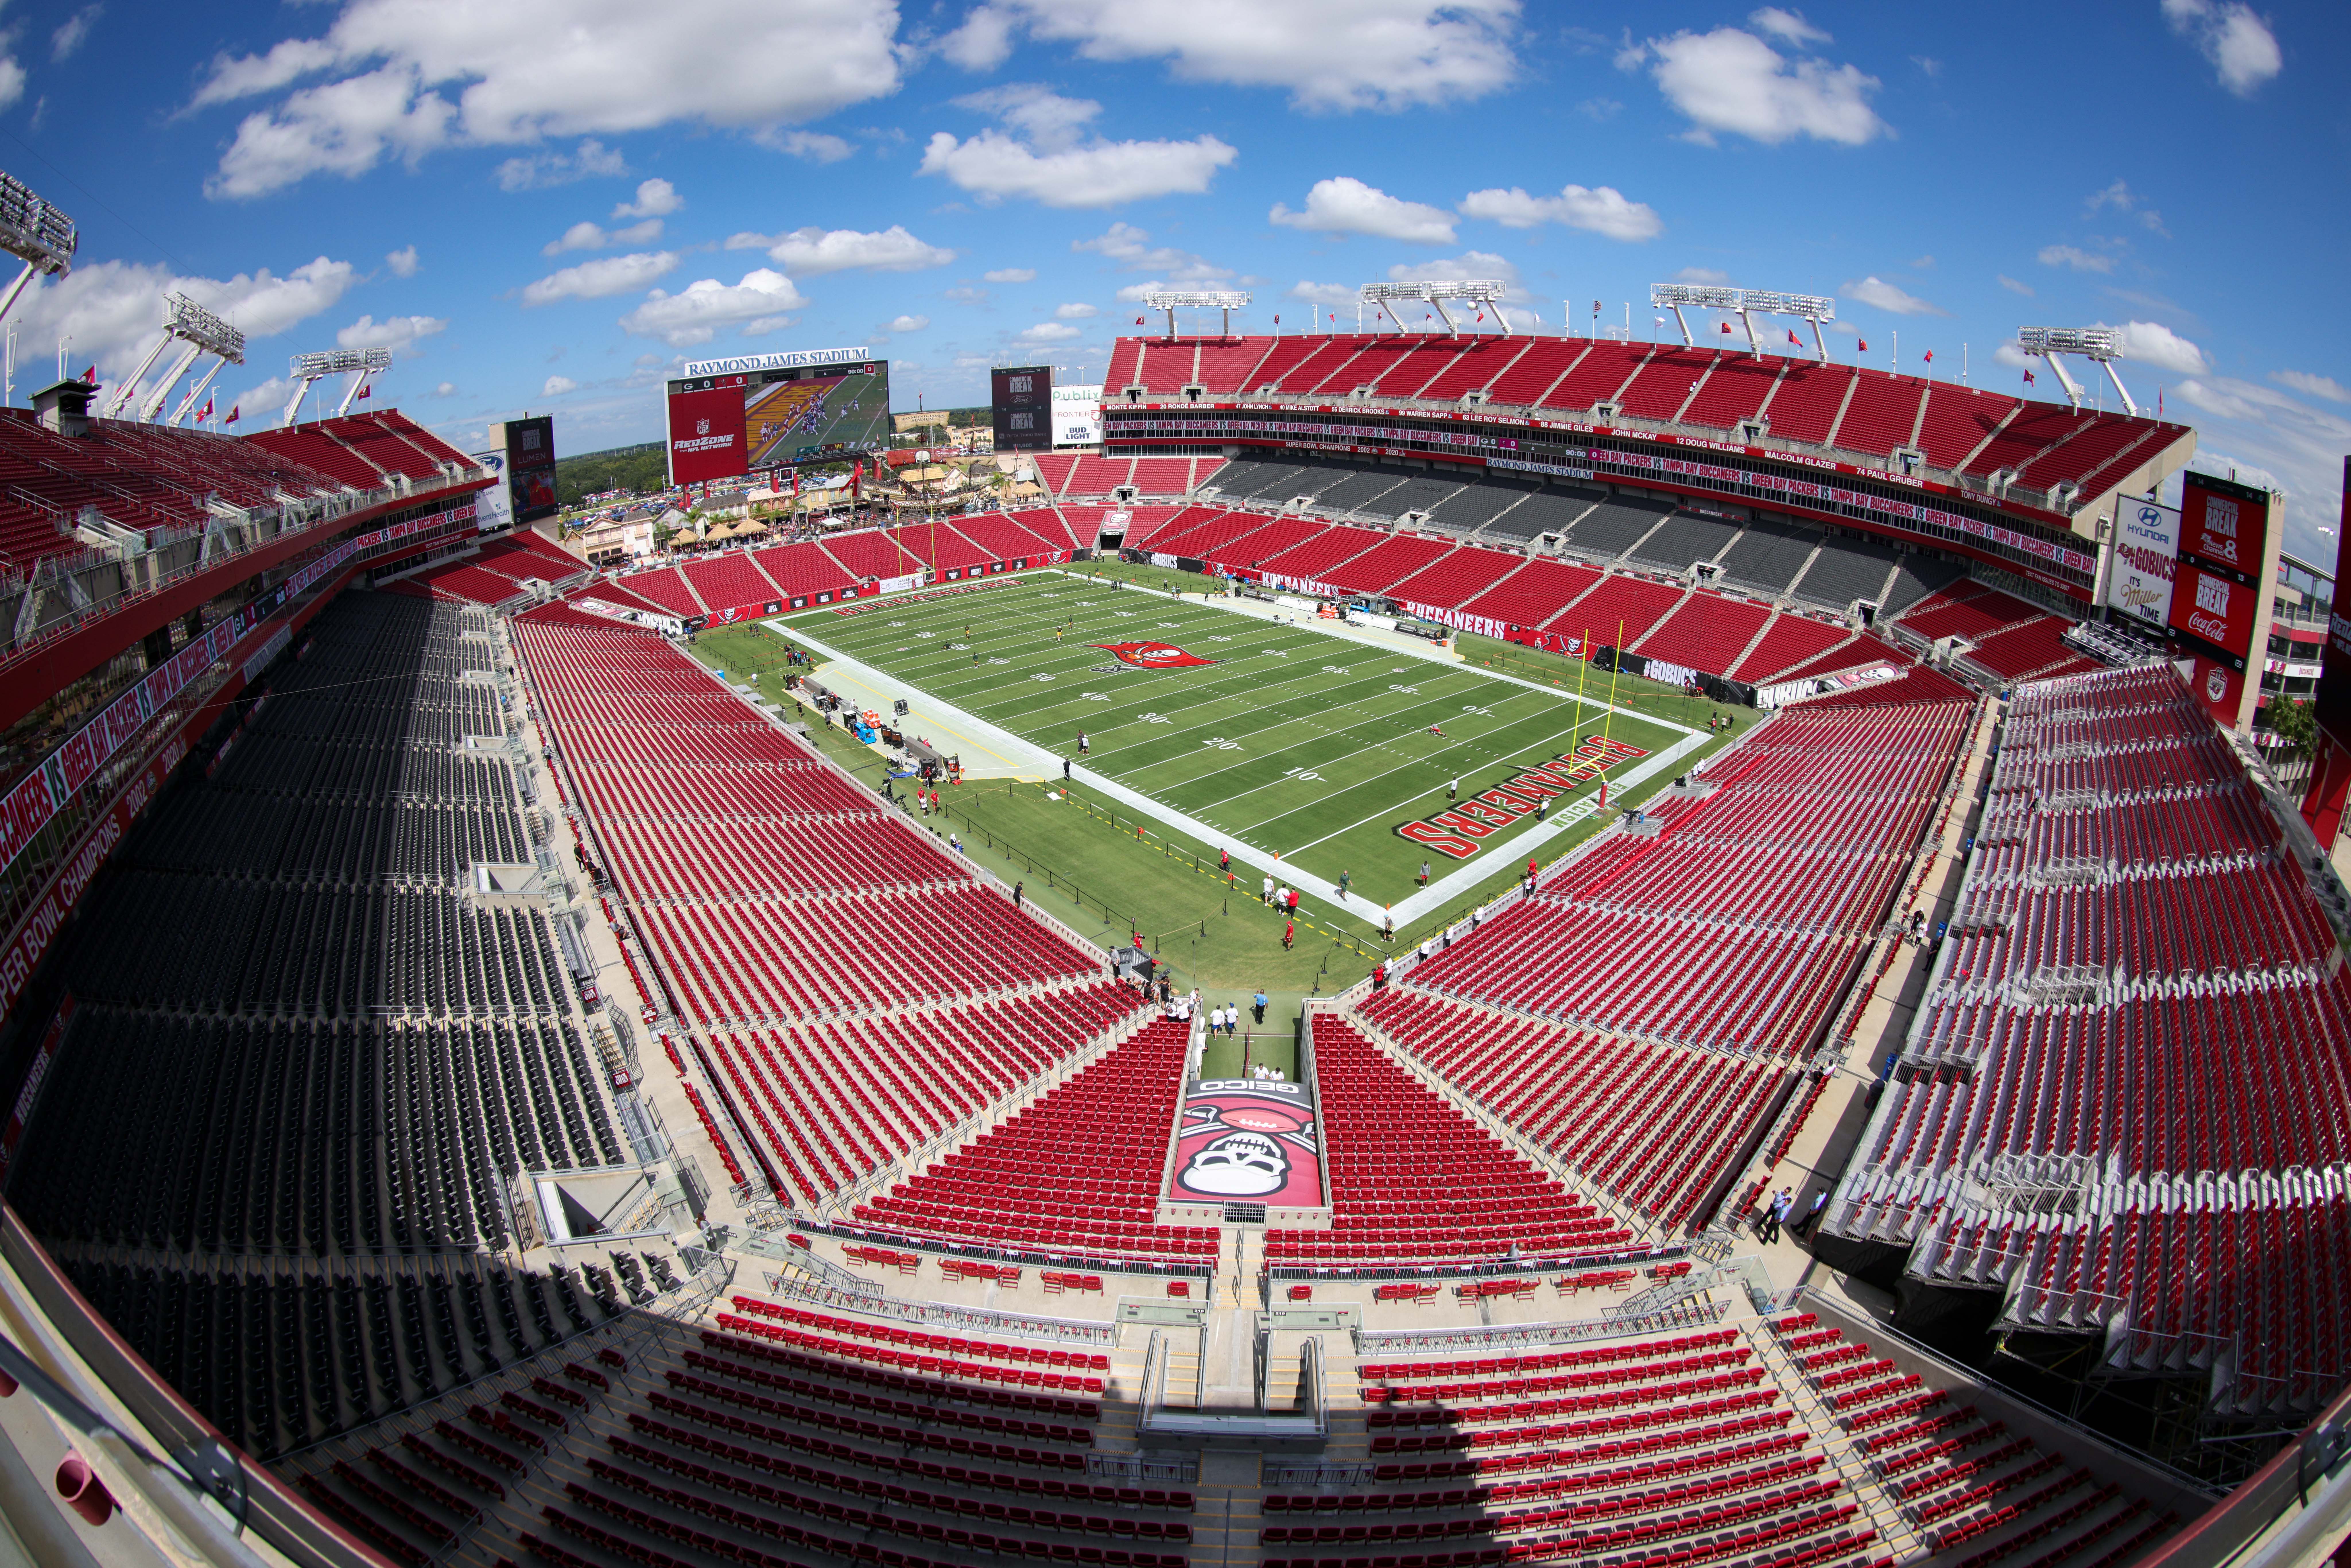 A general view of the stadium before the start of a game featuring the Green Bay Packers and Tampa Bay Buccaneers at Raymond James Stadium.